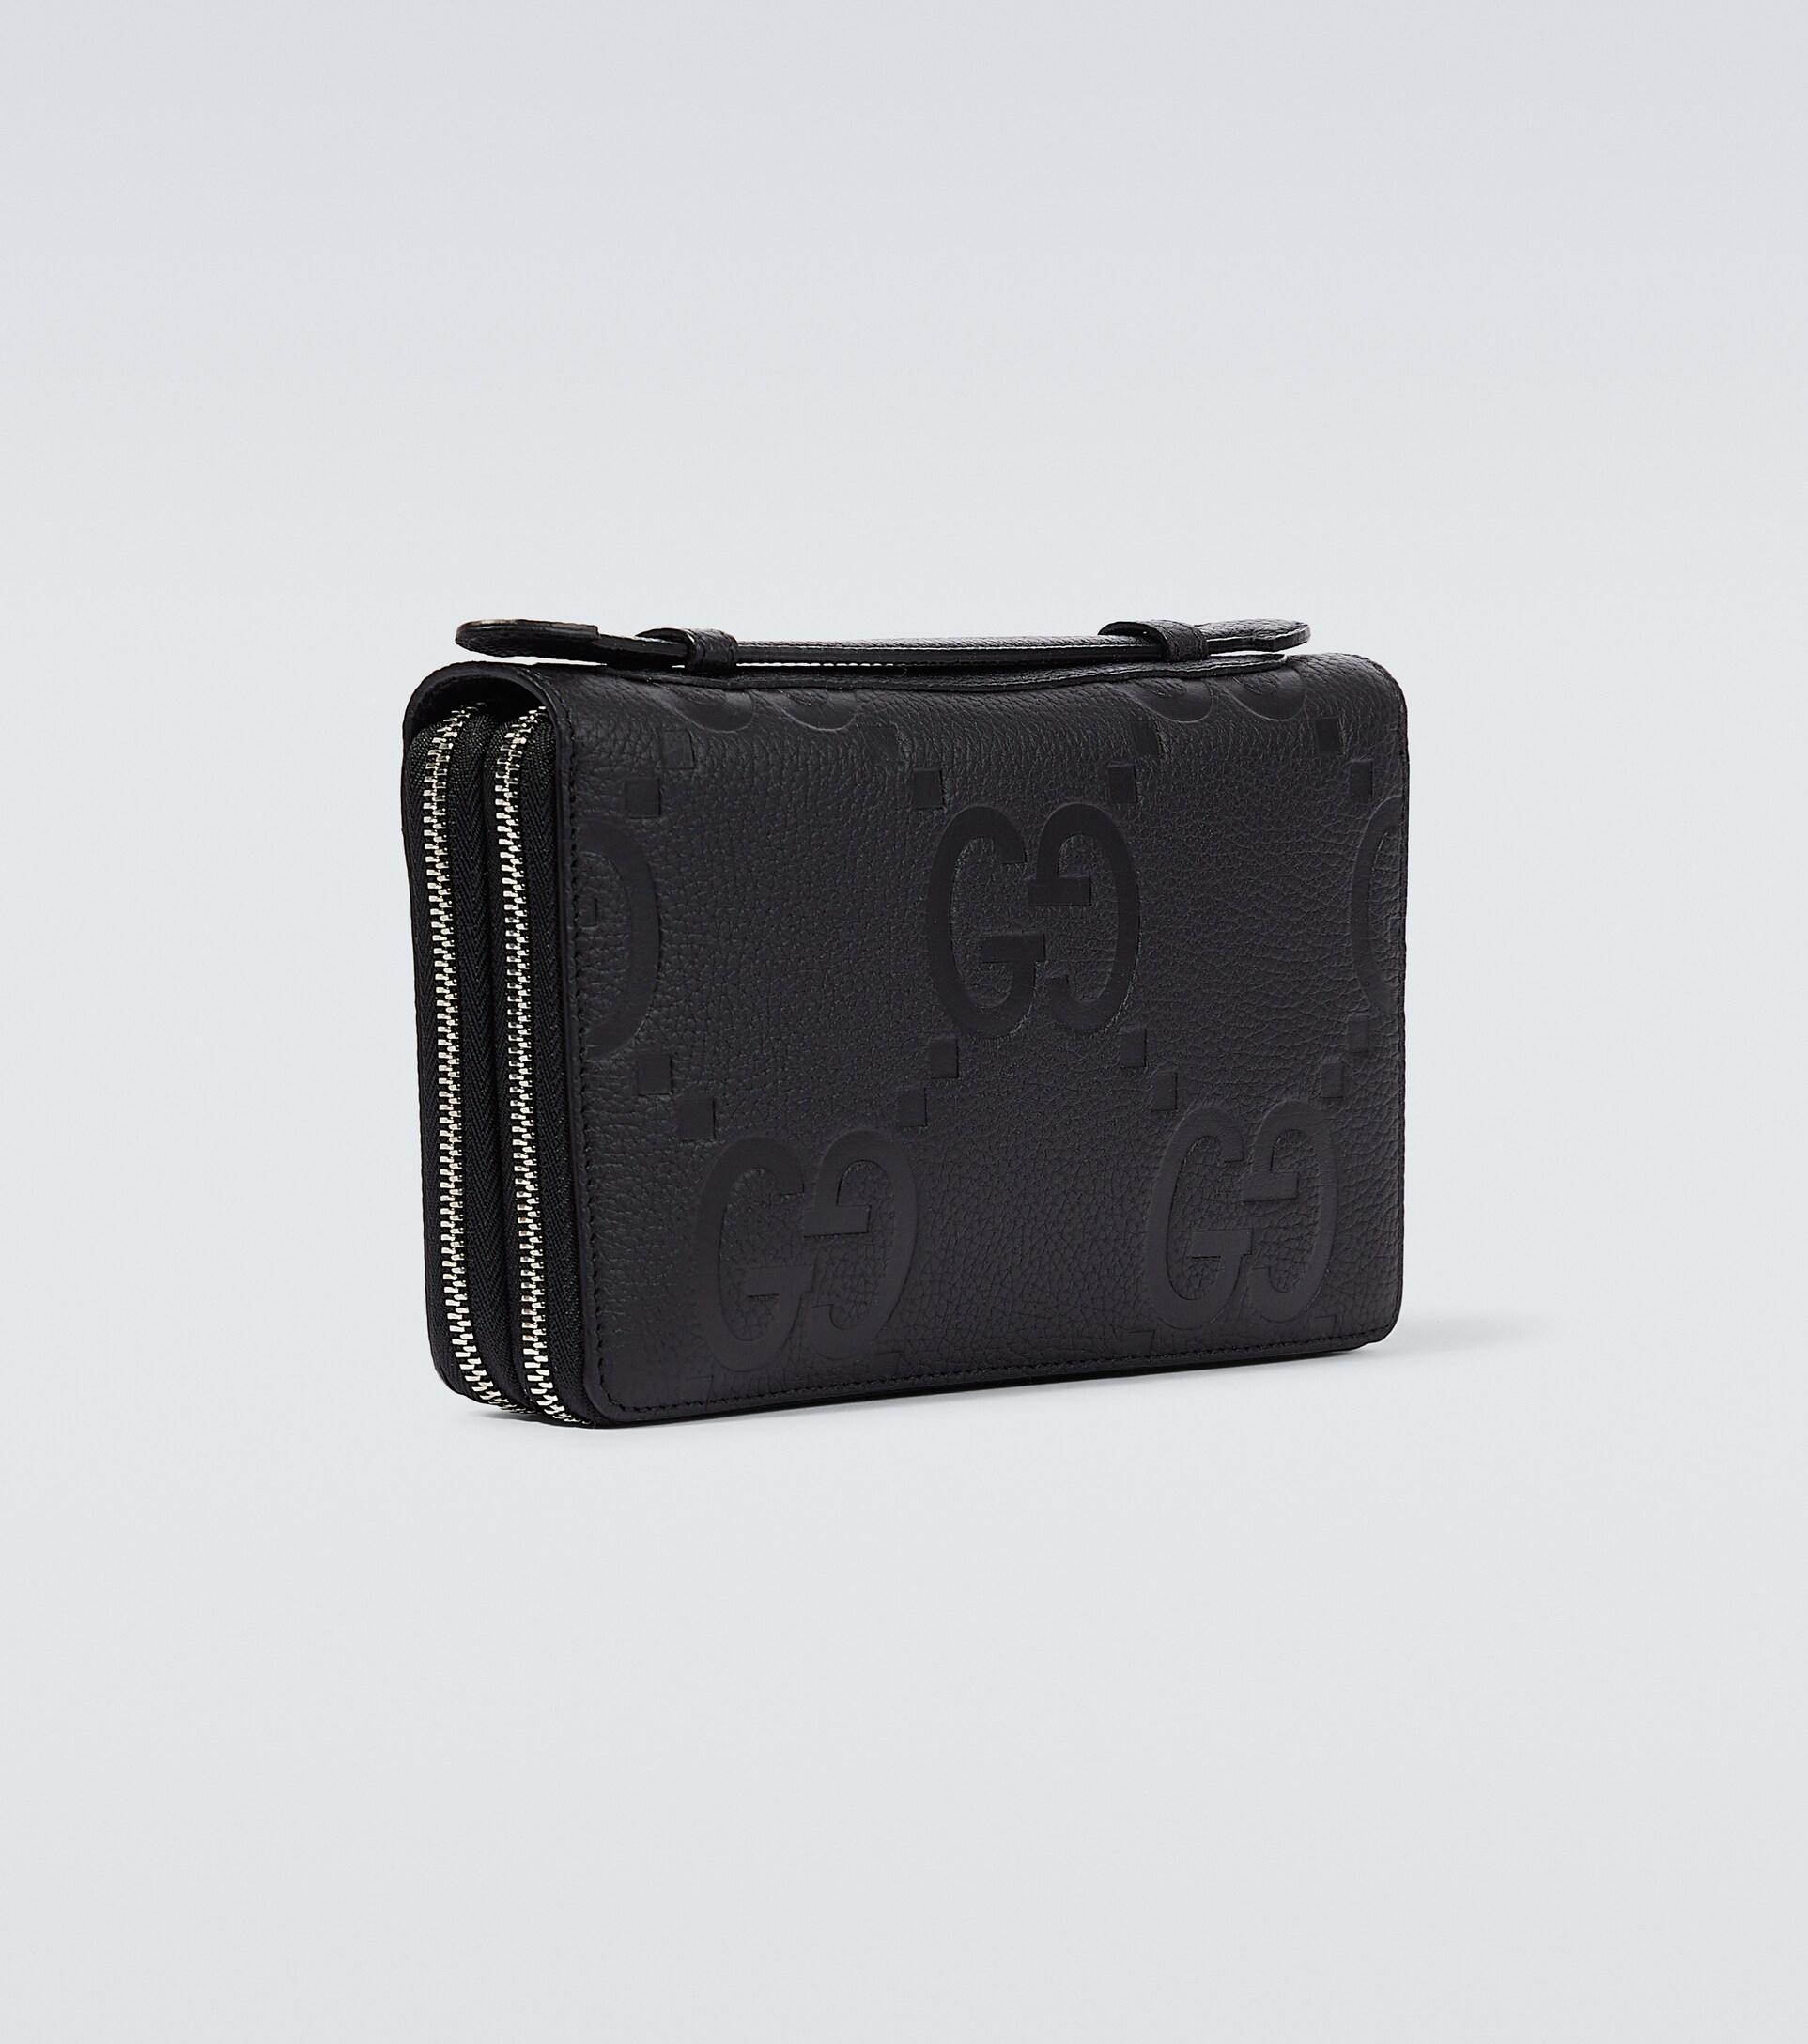 Jumbo GG coin wallet in black leather